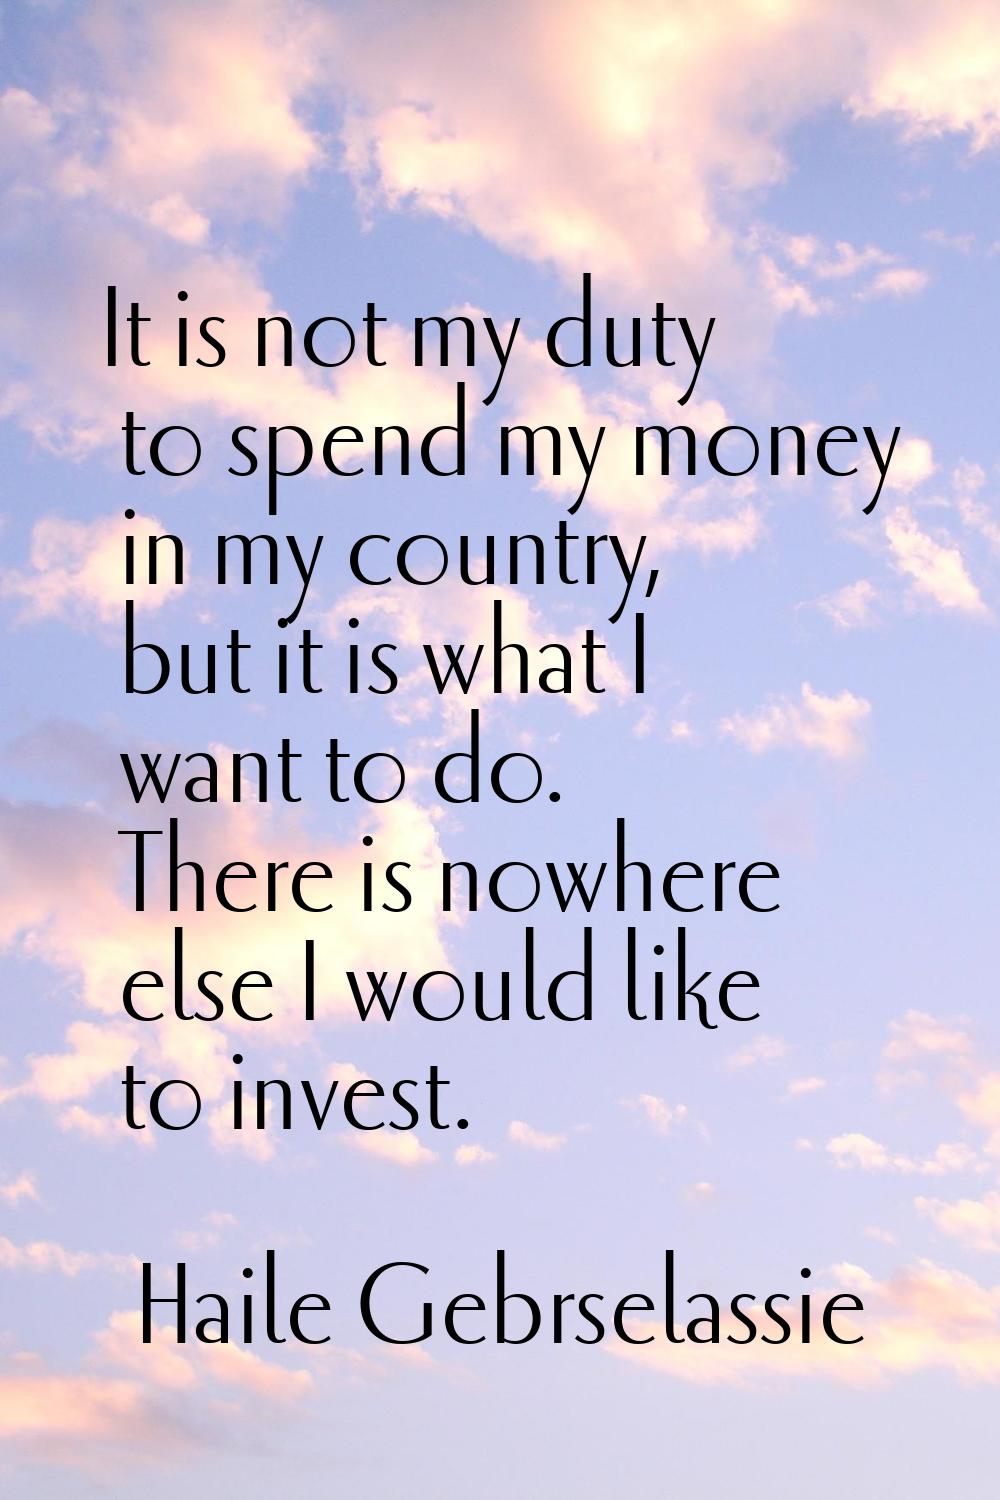 It is not my duty to spend my money in my country, but it is what I want to do. There is nowhere el